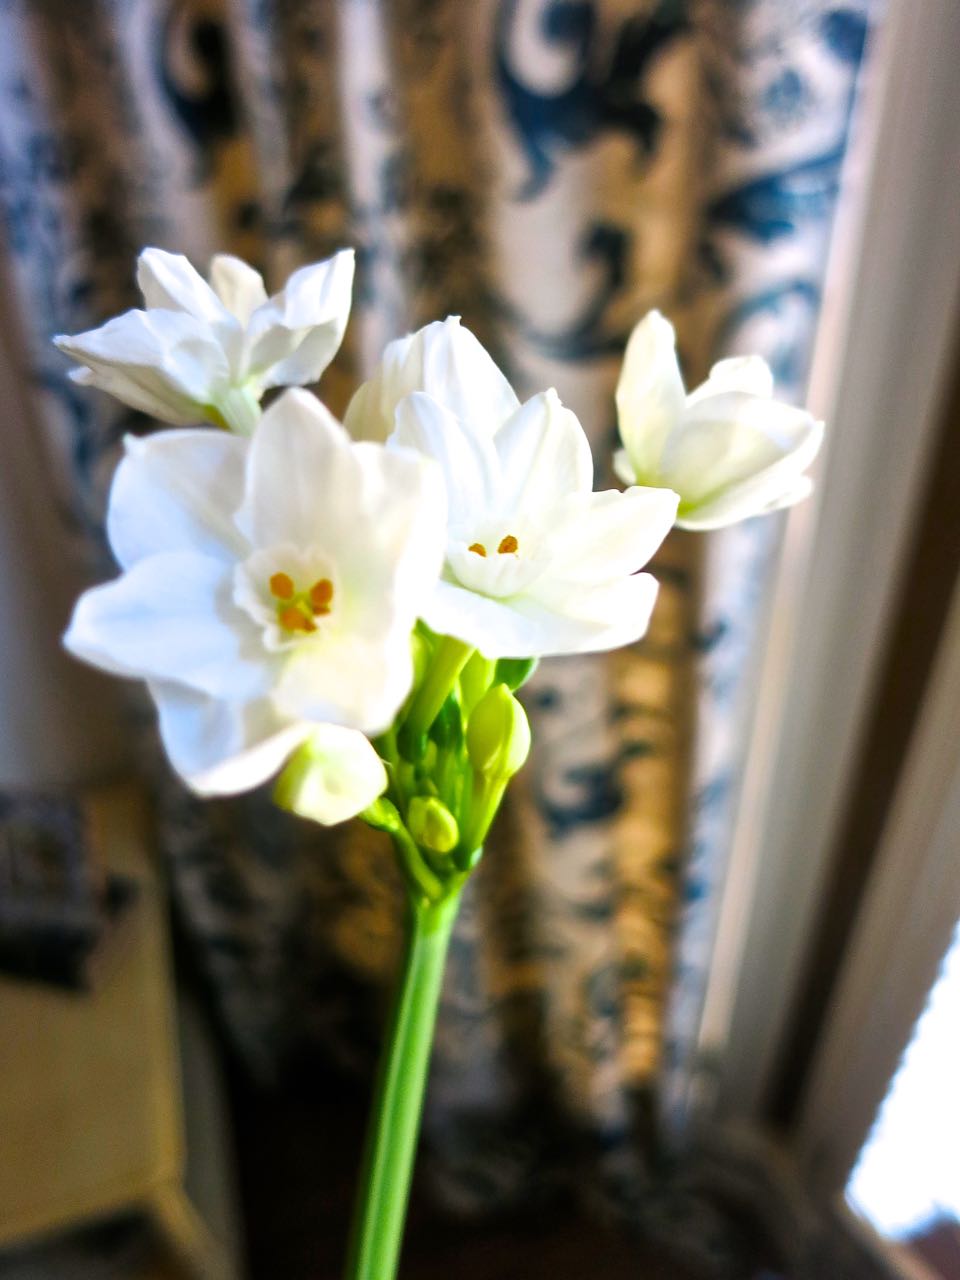 Growing Paperwhites in time for the holidays.